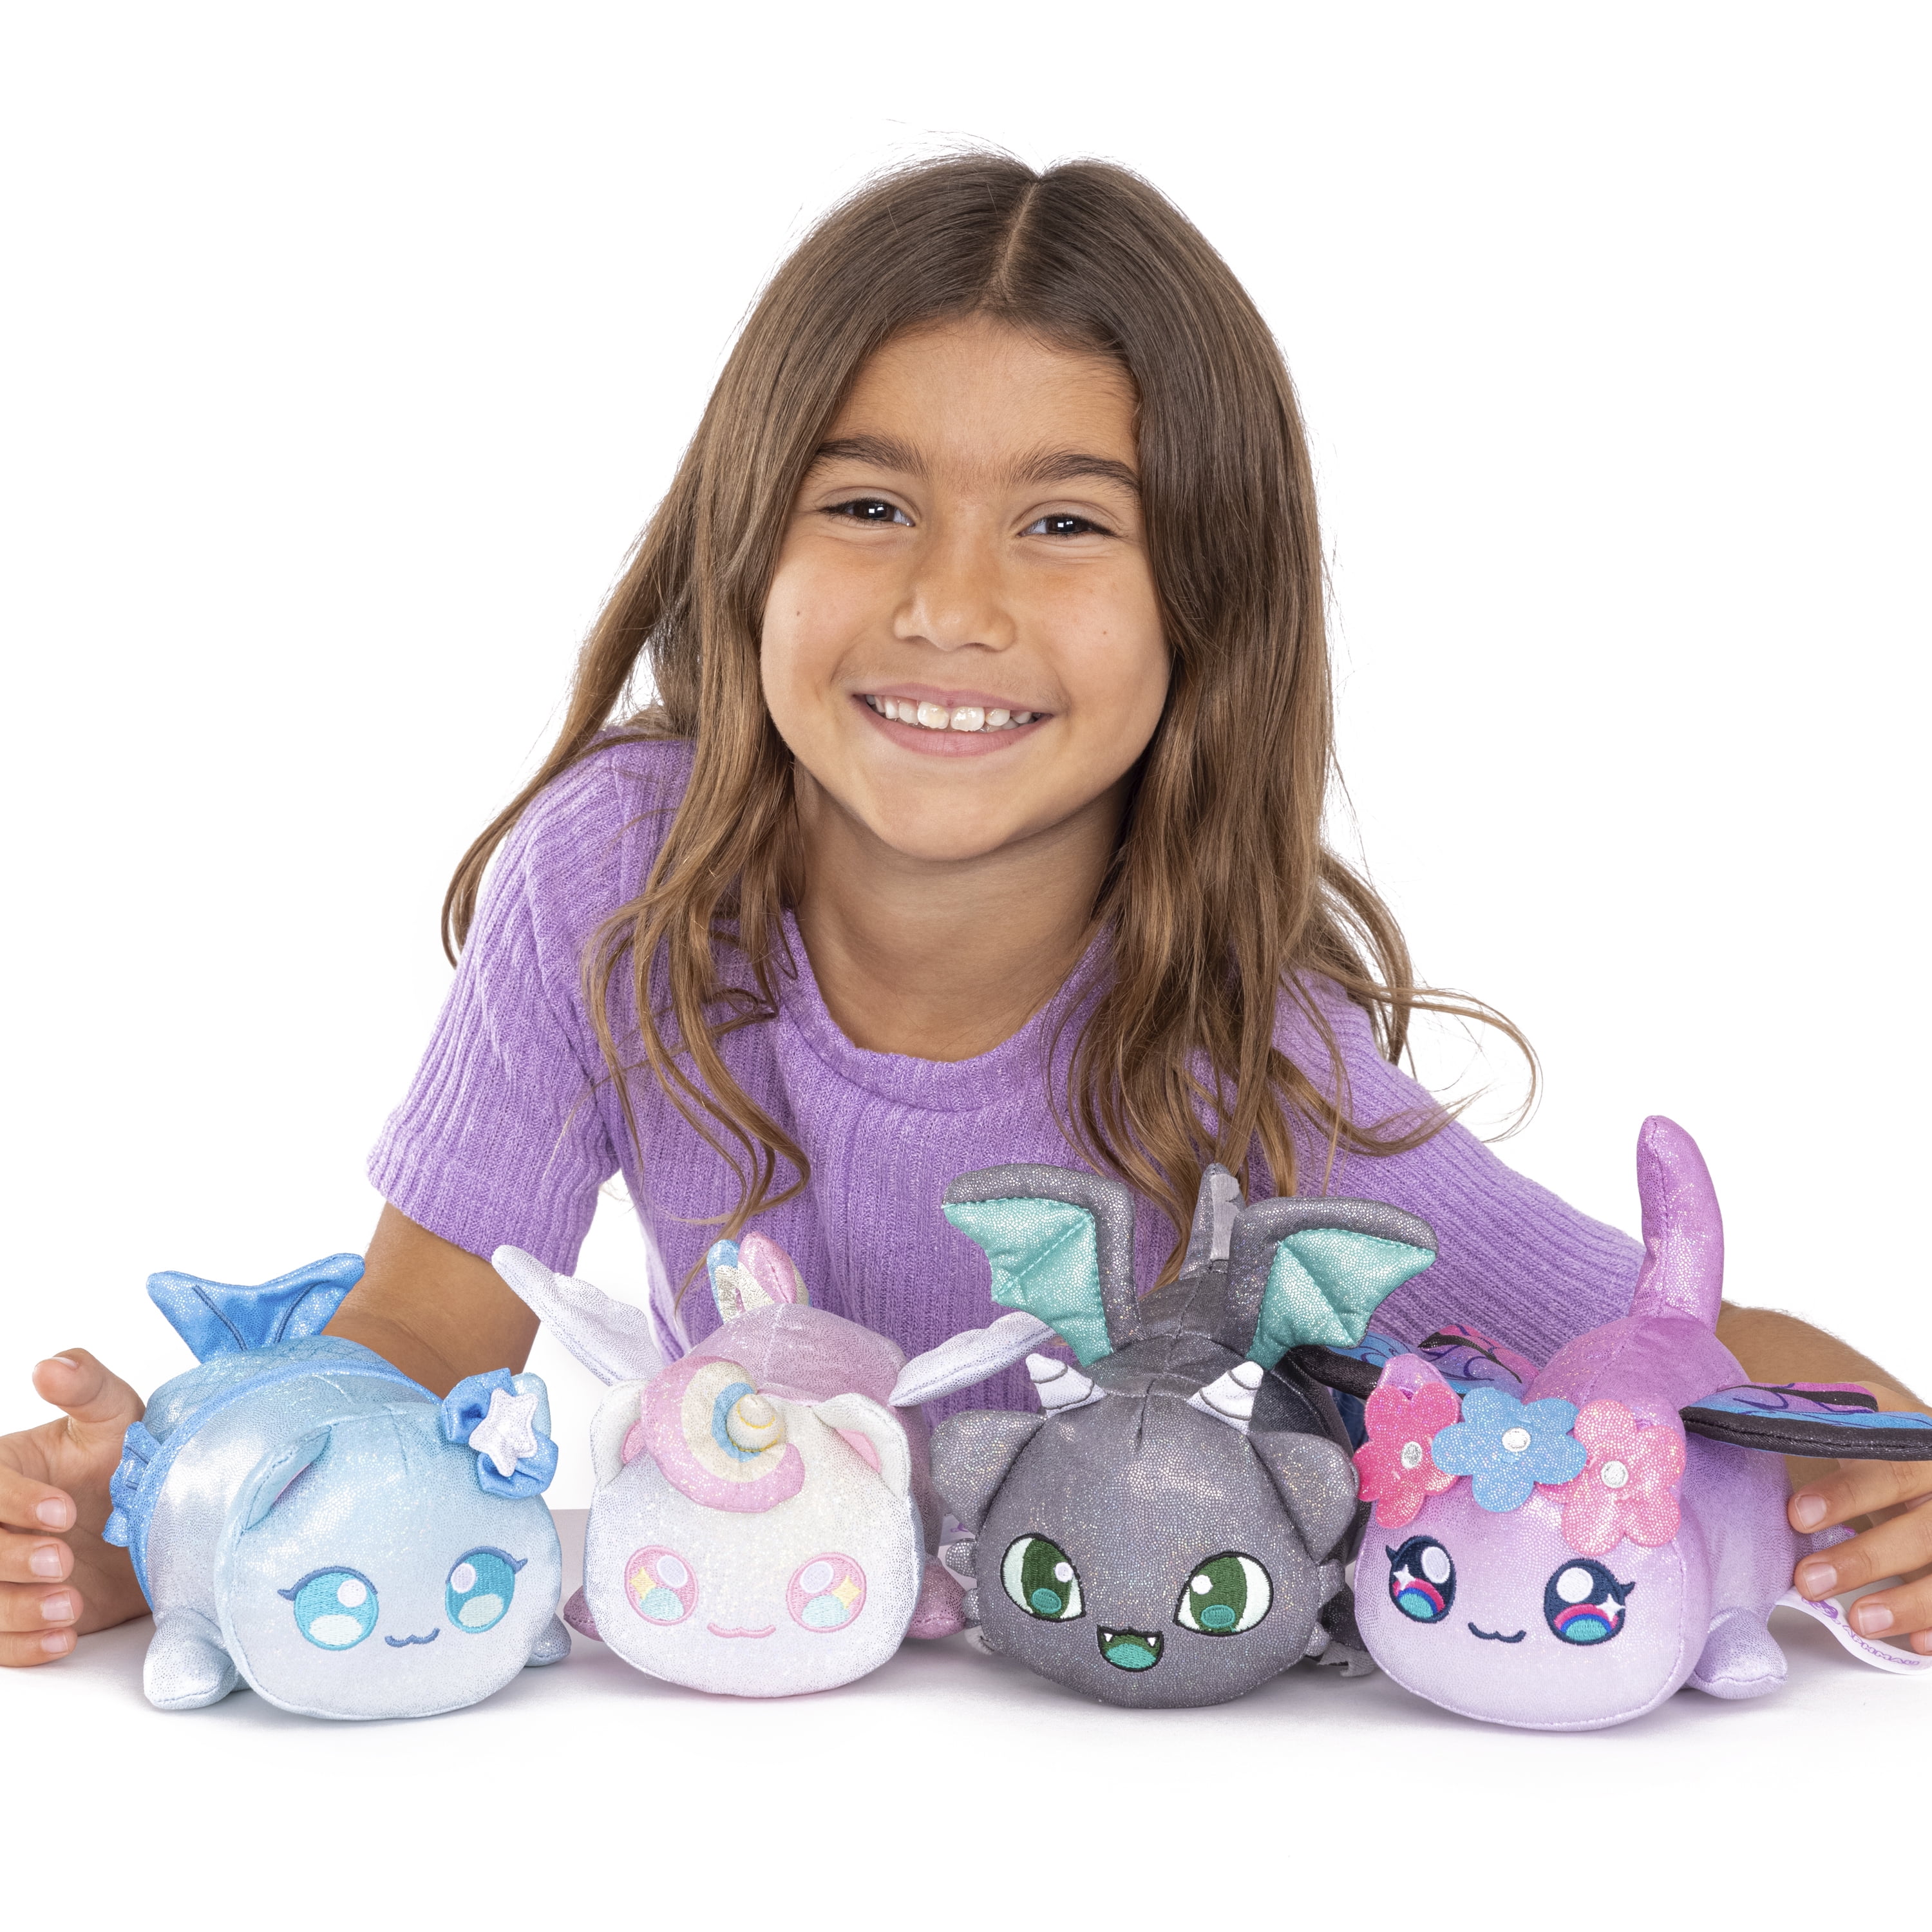 Aphmau MeeMeows Fashion Doll with 5 Mystery Surprises 810054661634